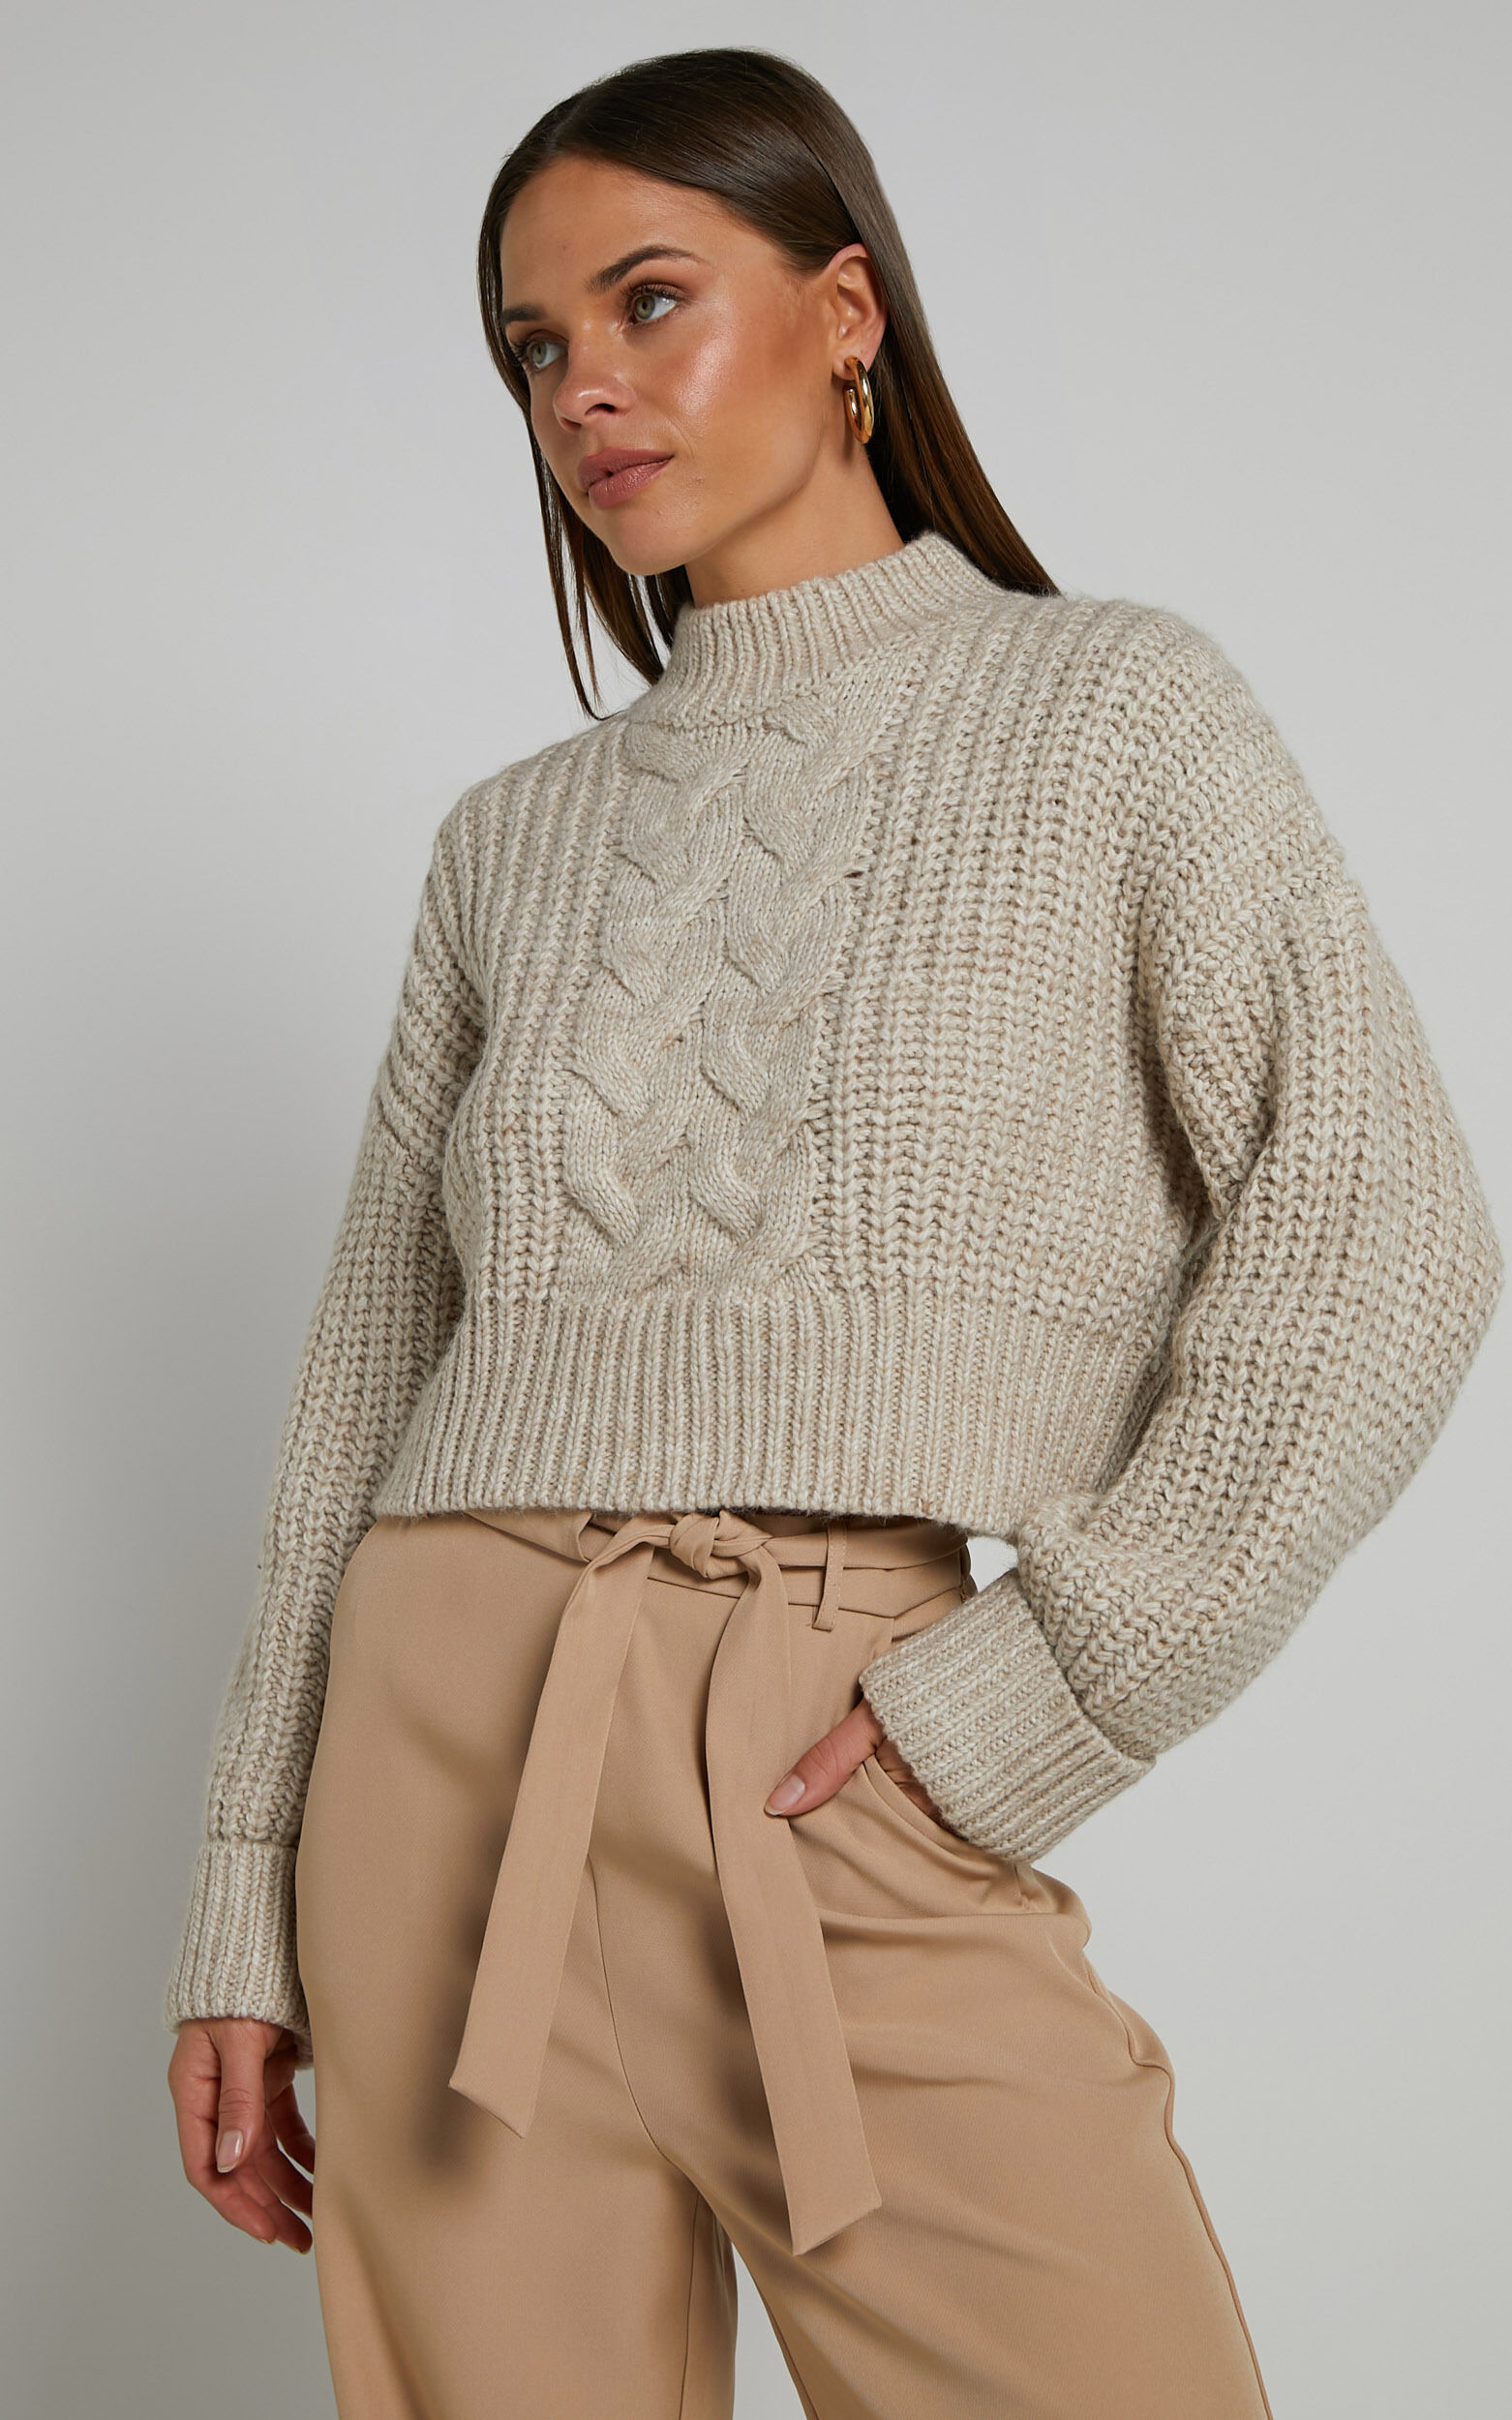 4Th & Reckless - CAROLYN KNIT JUMPER in Cream - 06, CRE1, super-hi-res image number null